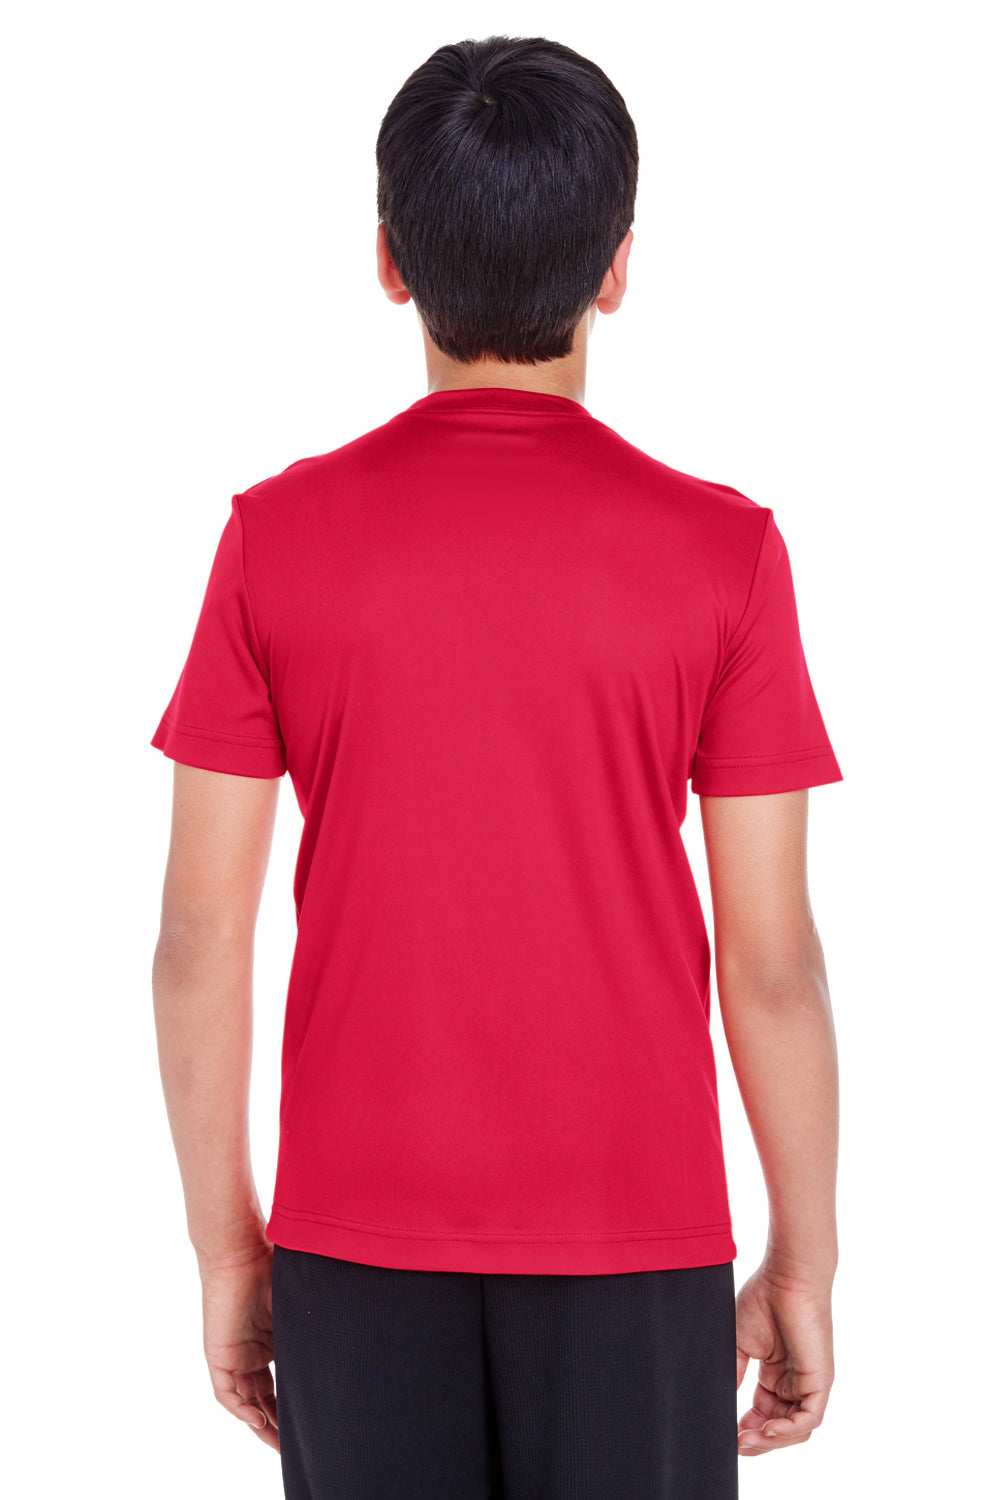 Team 365 TT11Y Youth Zone Performance Moisture Wicking Short Sleeve Crewneck T-Shirt Red Back